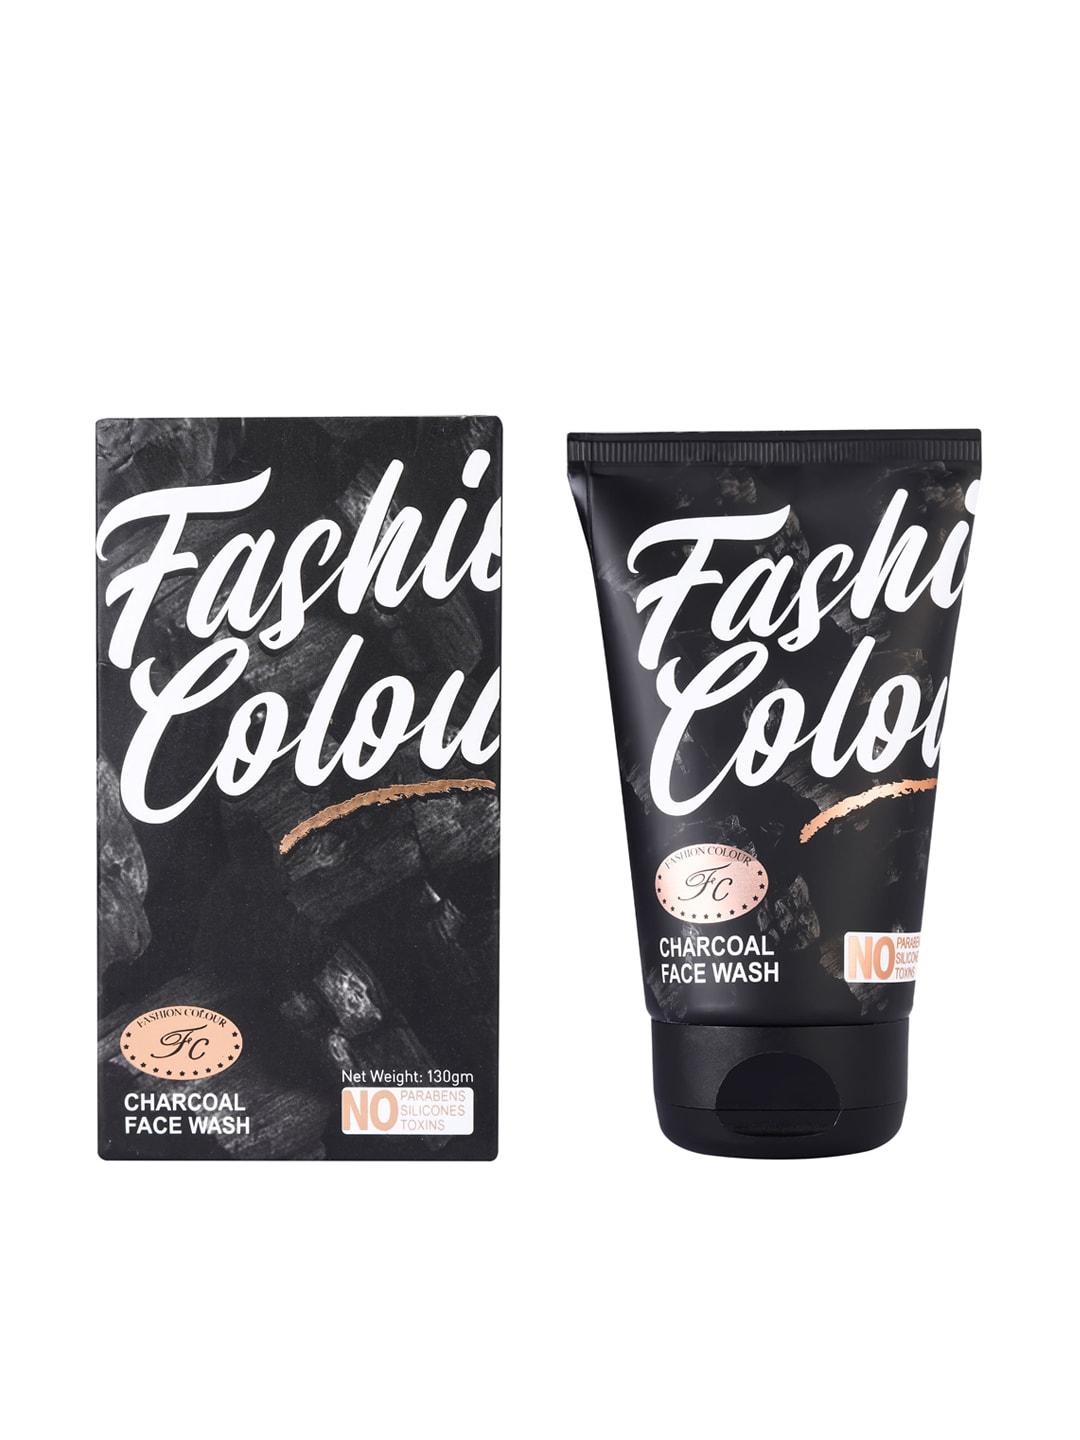 Fashion Colour Charcoal Face Wash with Aloe Vera & Activated Charcoal - 130 g